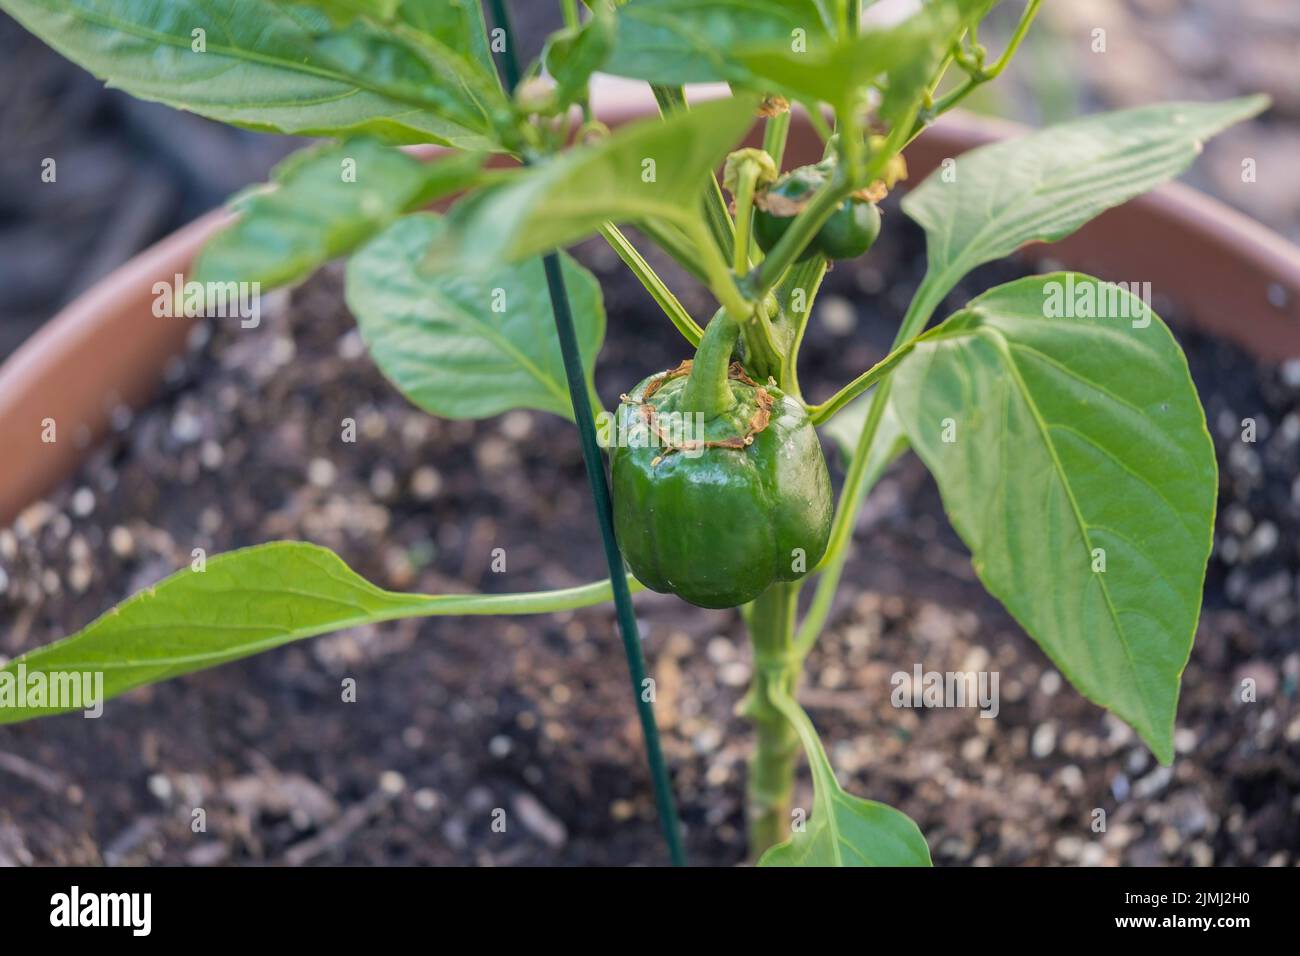 Potted red bell pepper plant, capsicum annuum, growing and still green. Late spring, Wichita, Kansas, USA. Stock Photo